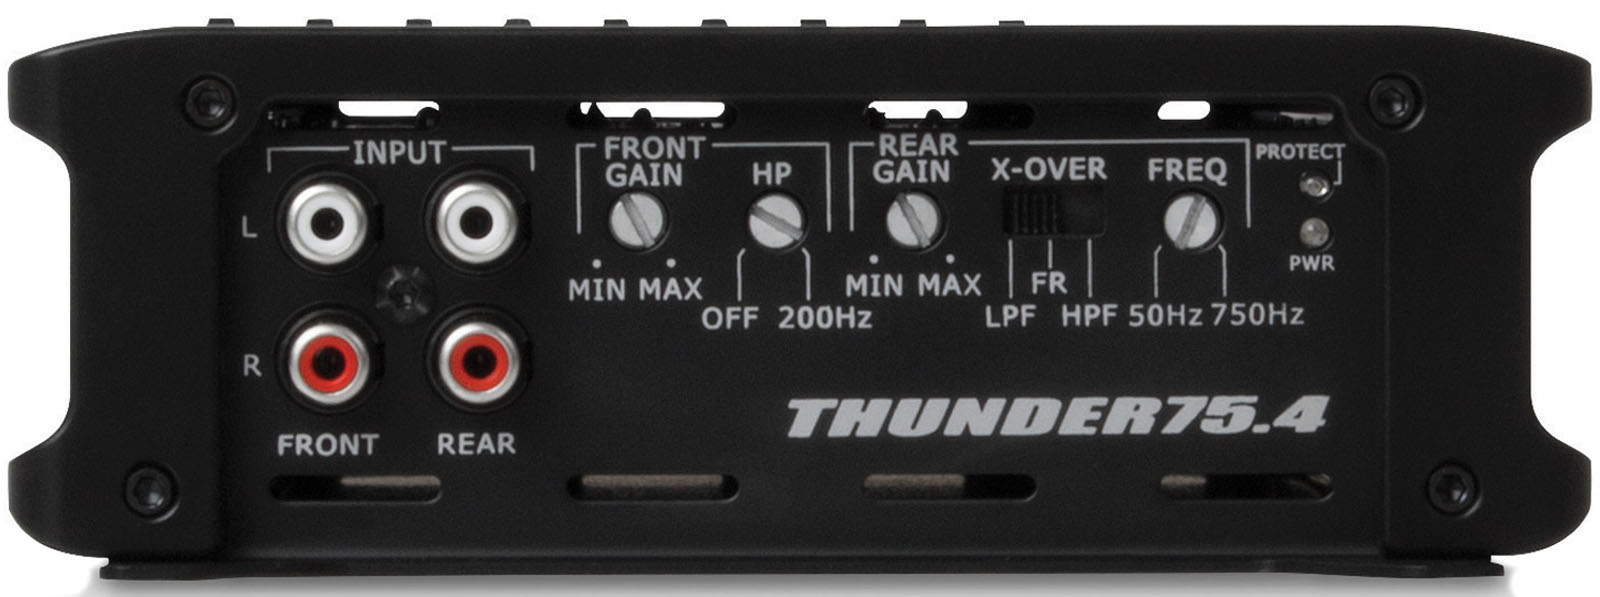 thunder series thunder754 400w rms 4 channel class ab amplifier